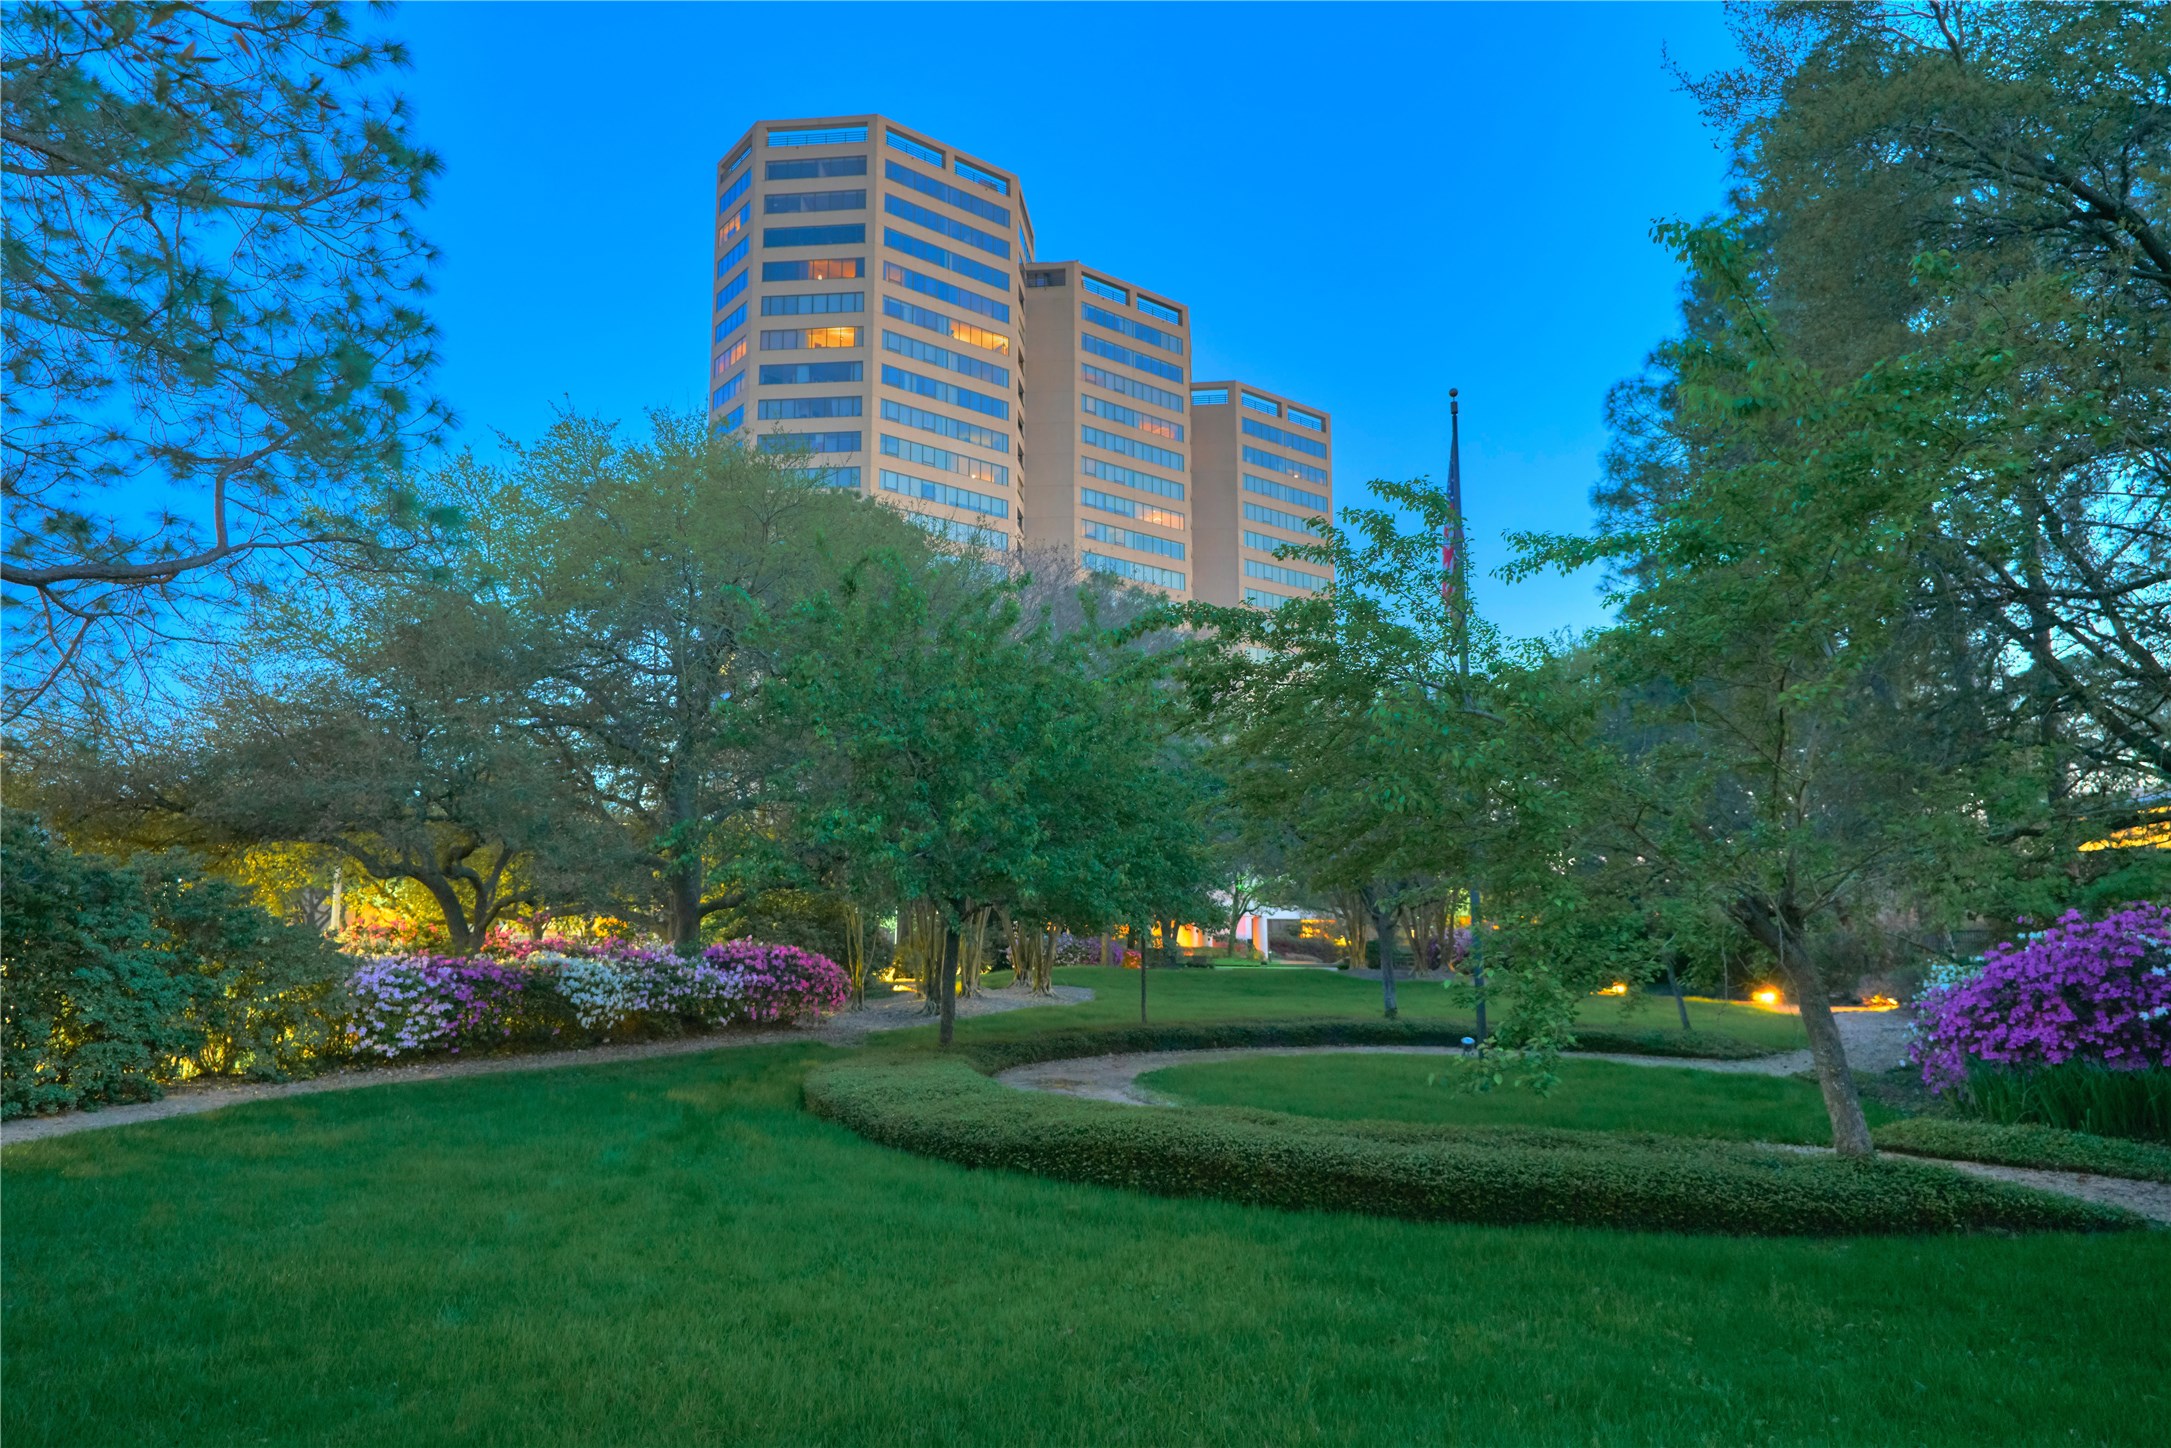 Incomparable front garden for Bayou Bend Towers.